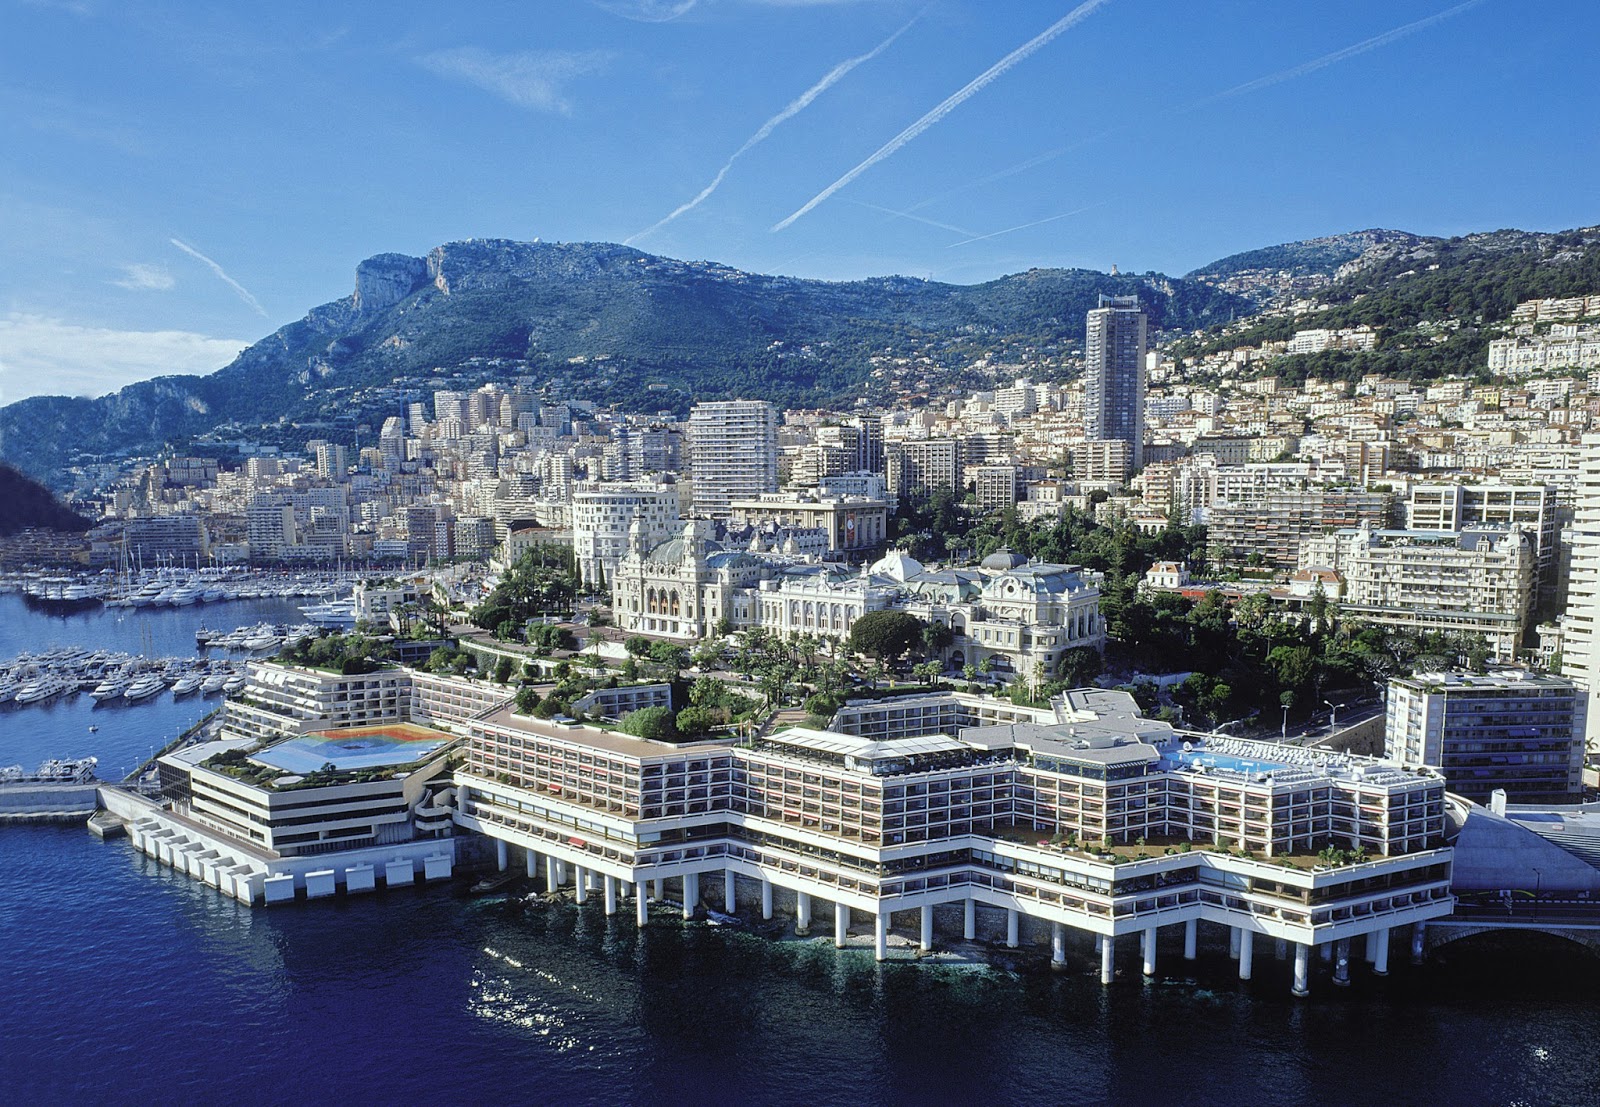 Monte Carlo, What You Should Do (&#038; Not Do) In Monte Carlo